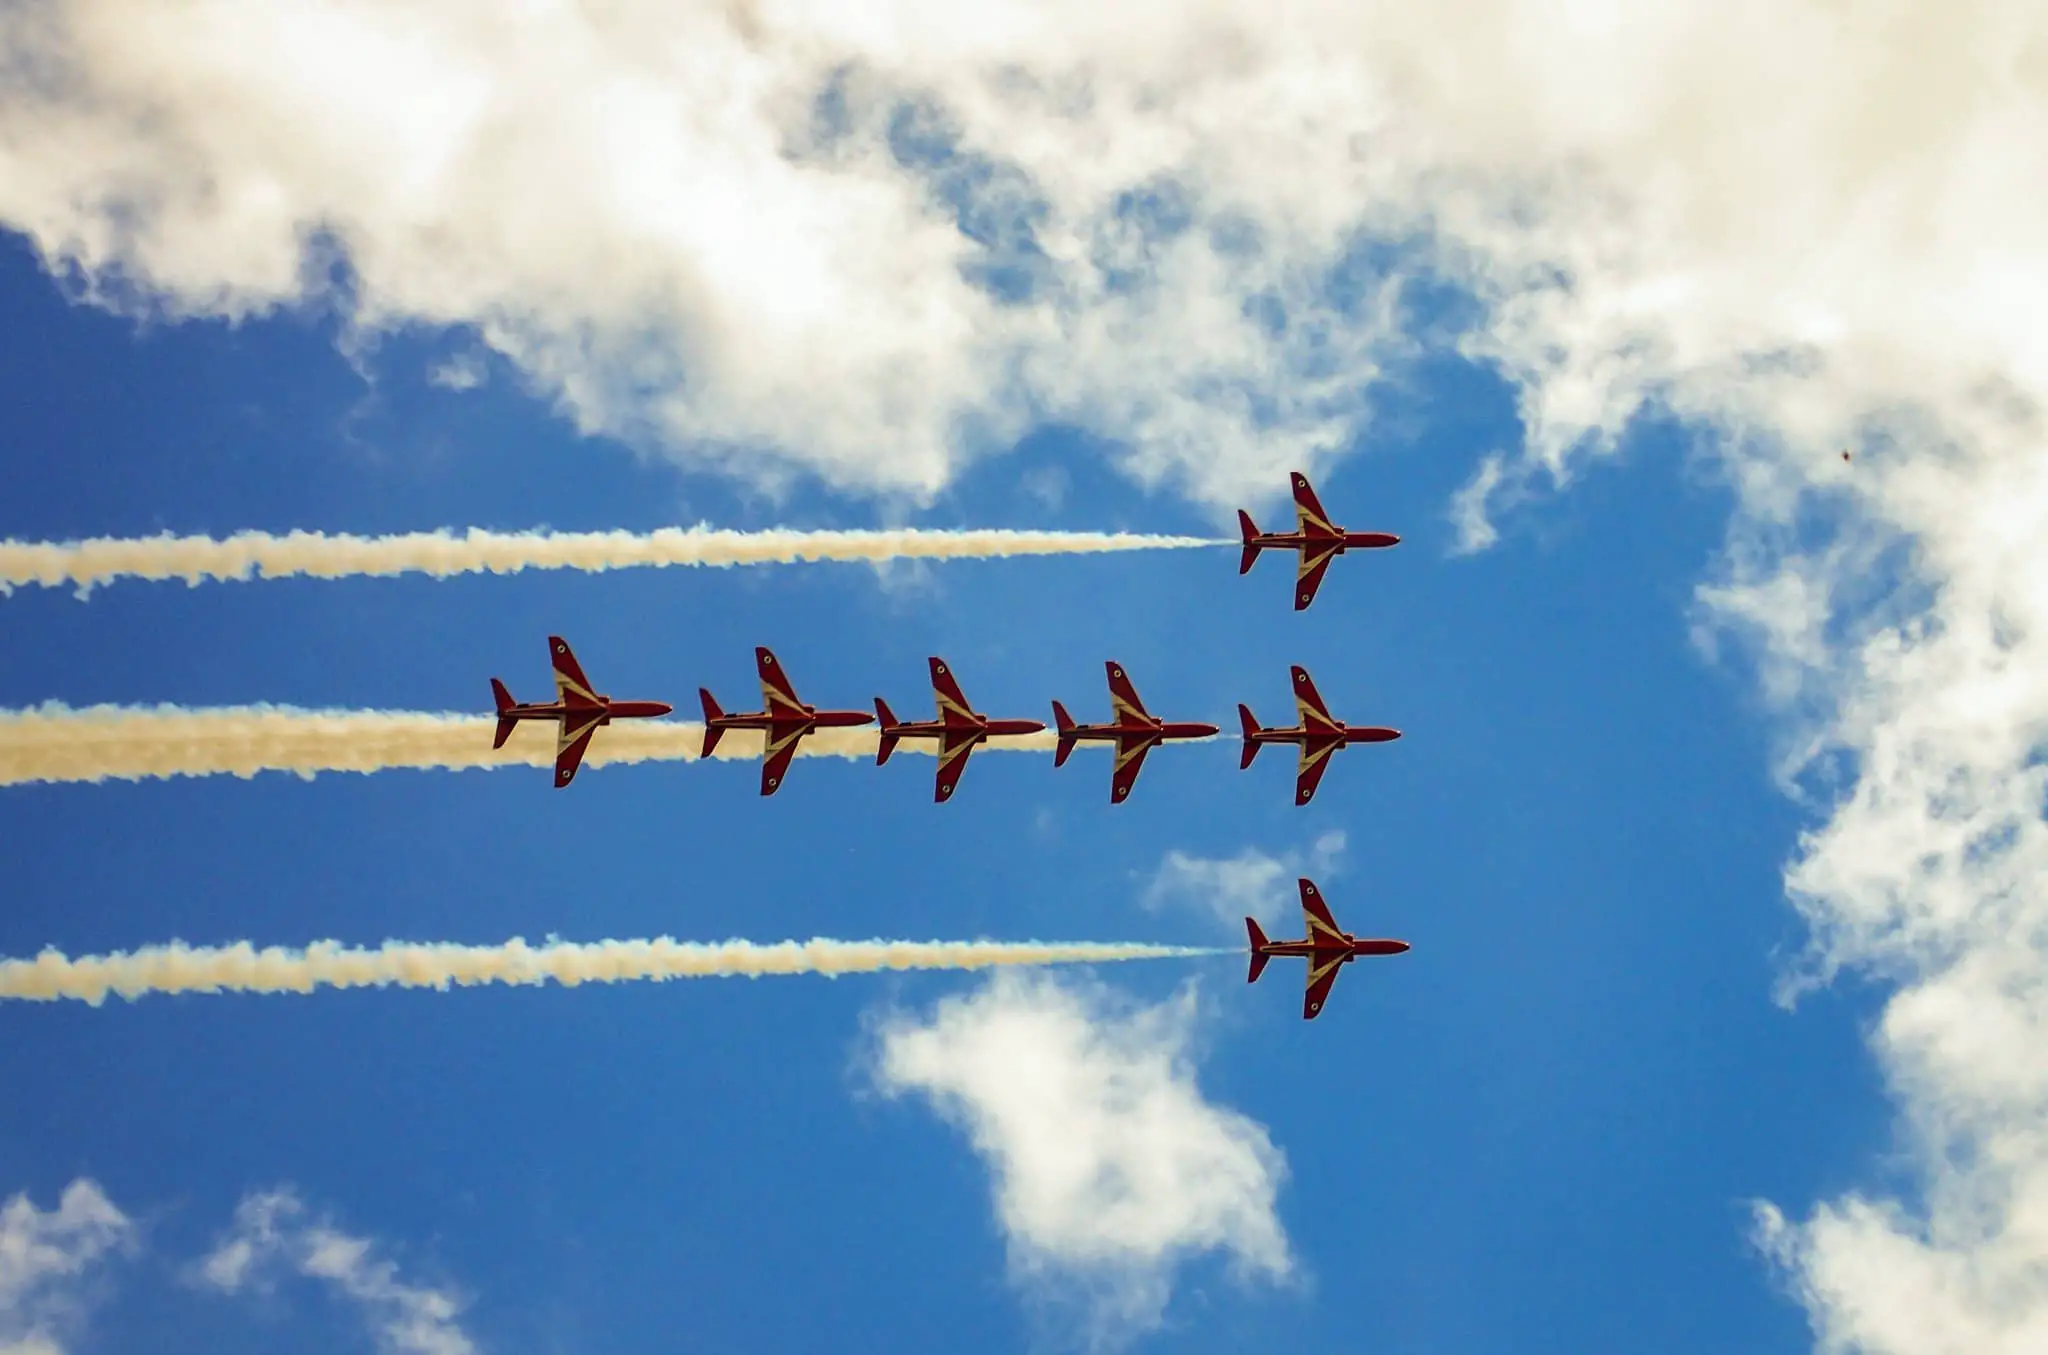 Red Arrows against a blue sky and fluffy clouds by Steven Penton